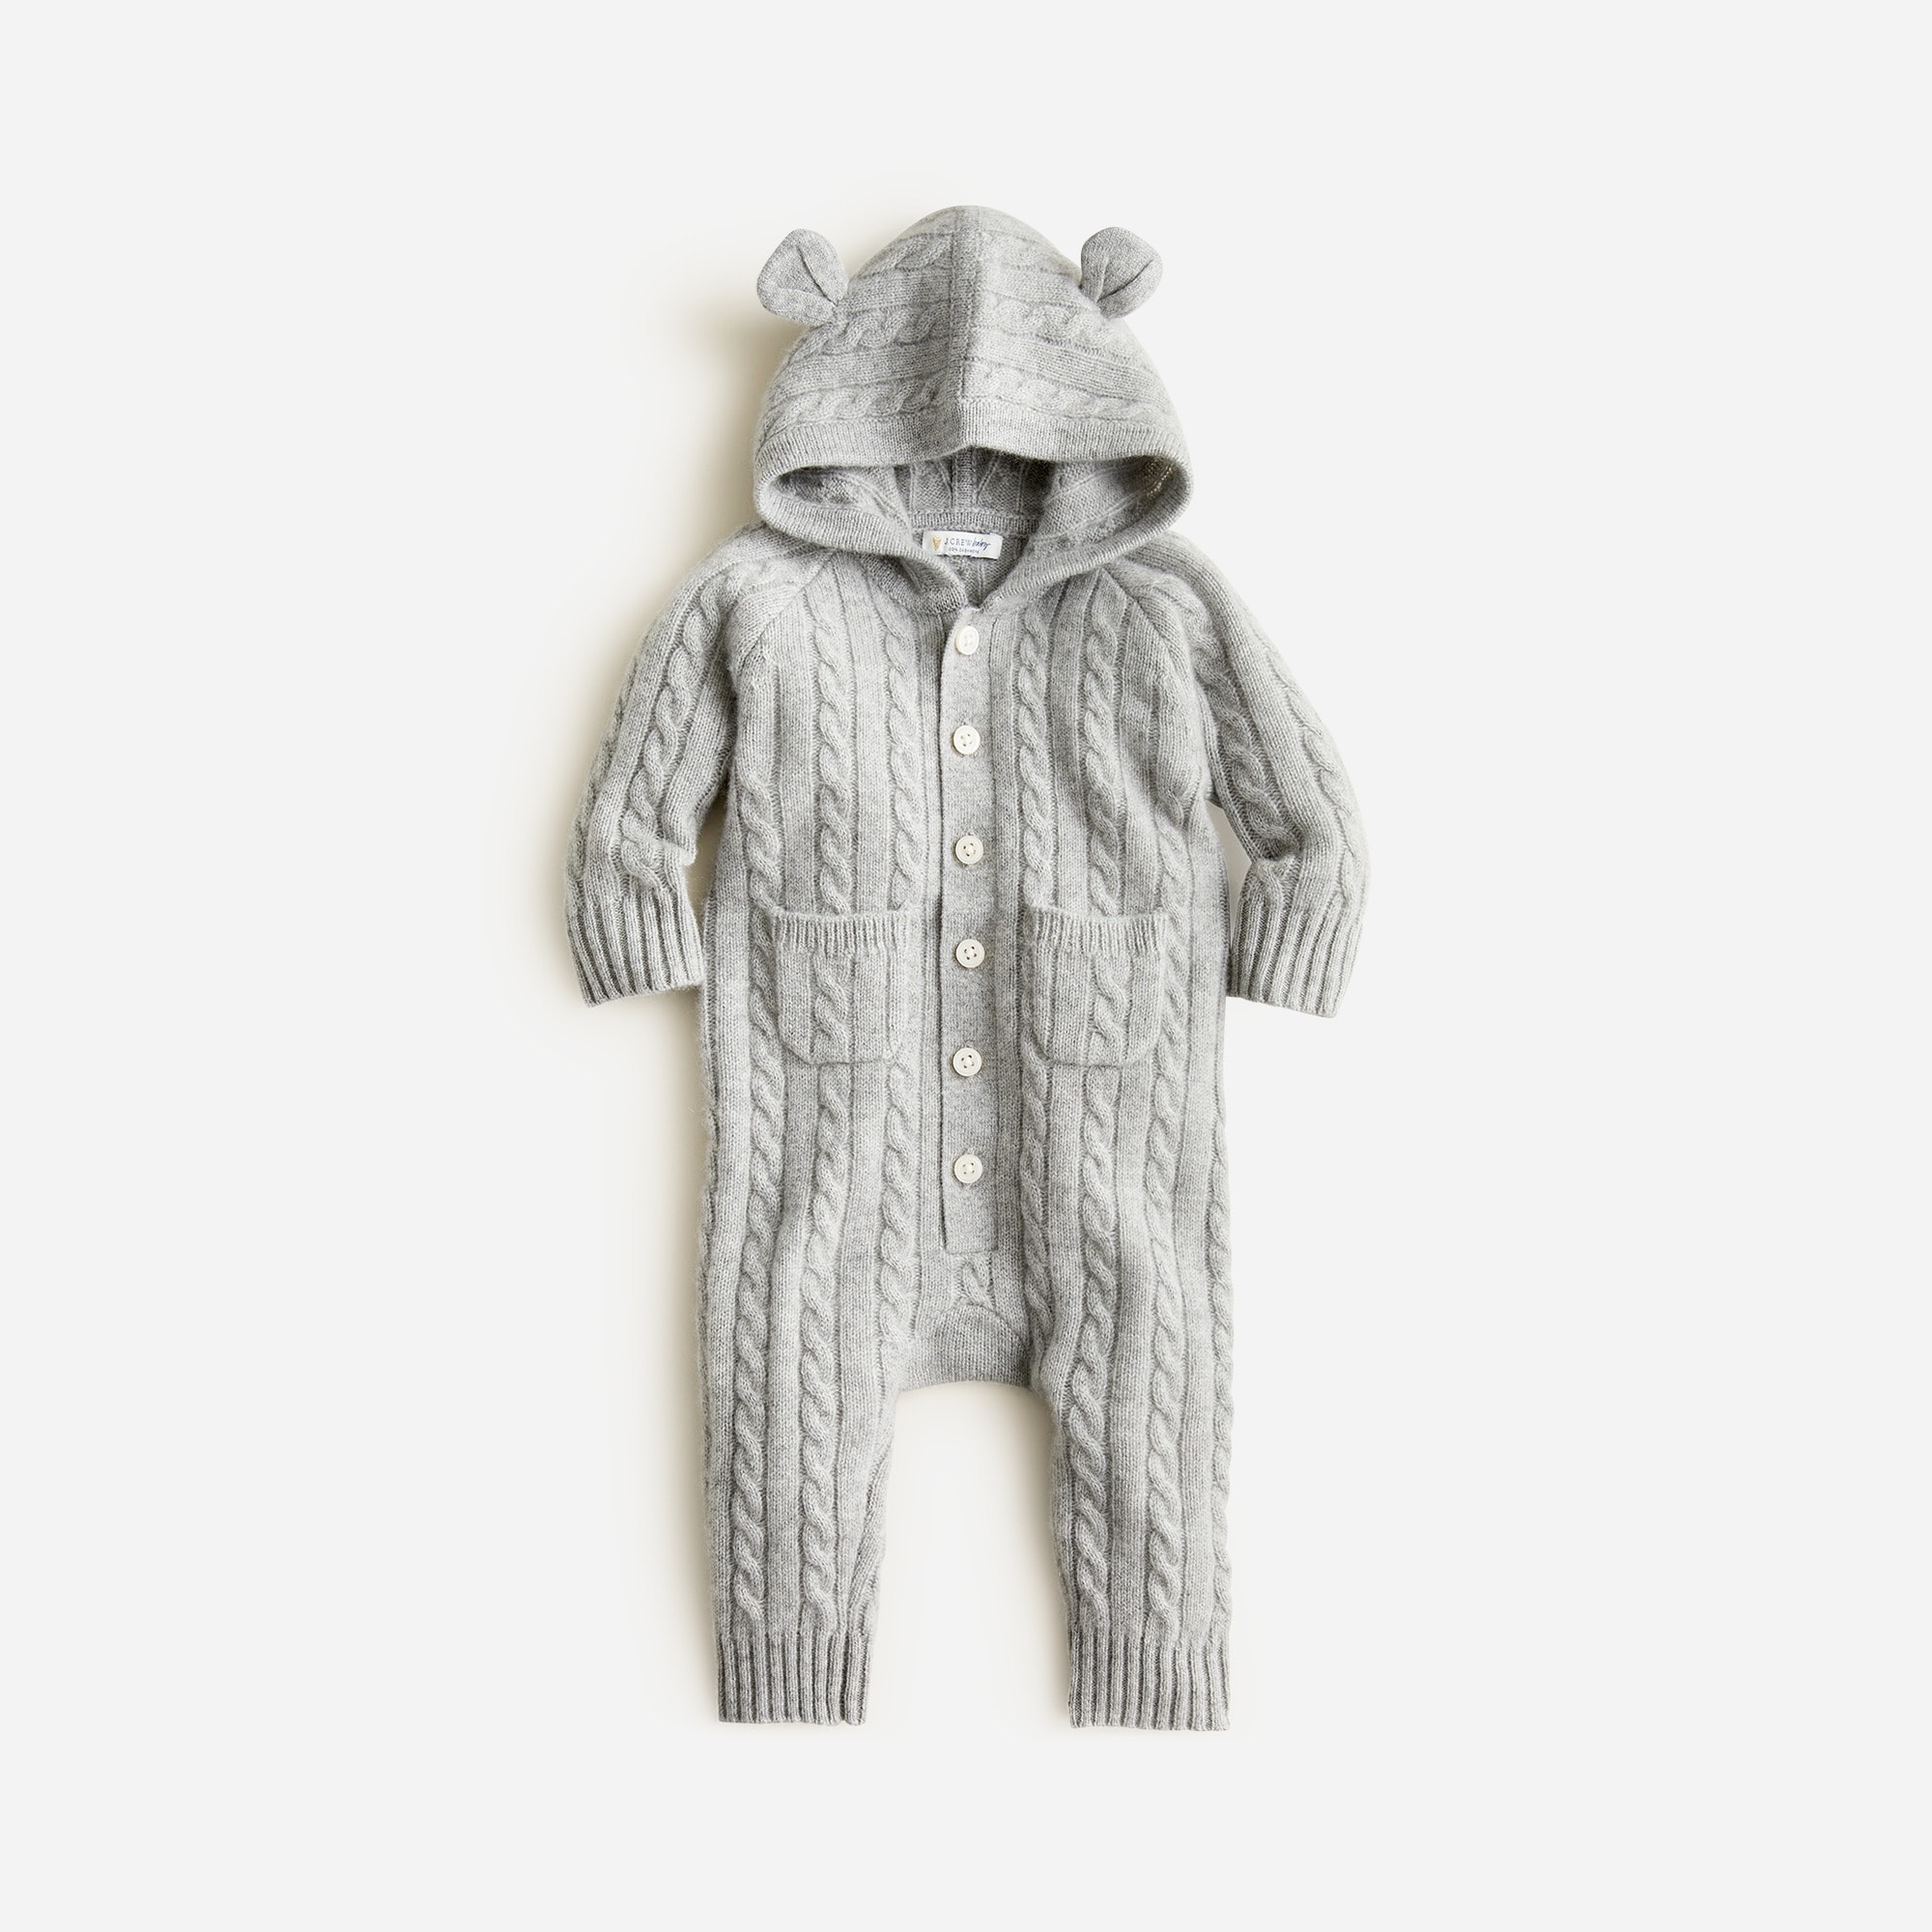 Jcrew Limited-edition baby cashmere cable-knit bear one-piece